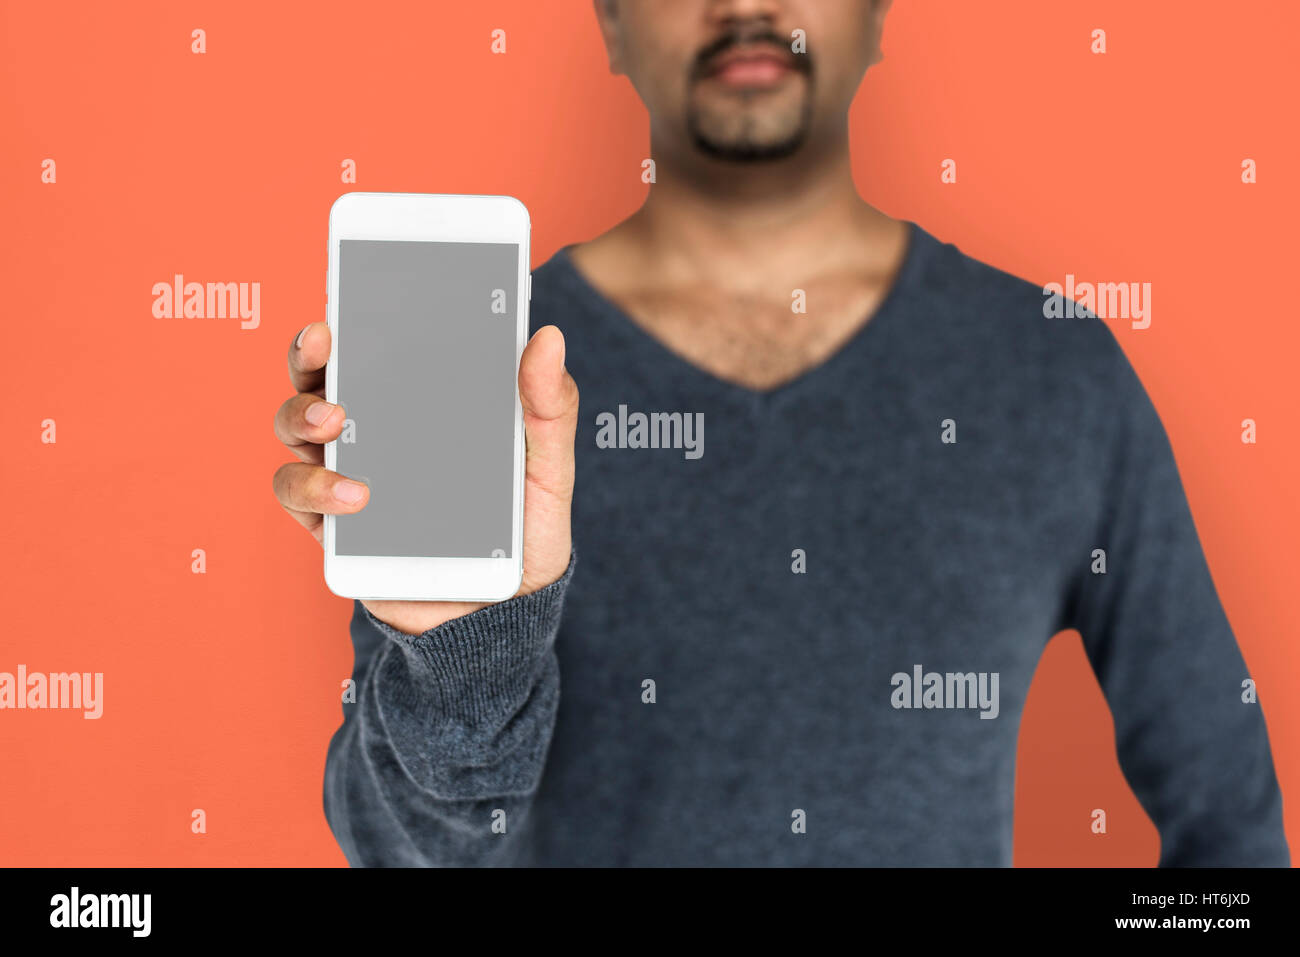 African Descent Man Holding Phone Stock Photo